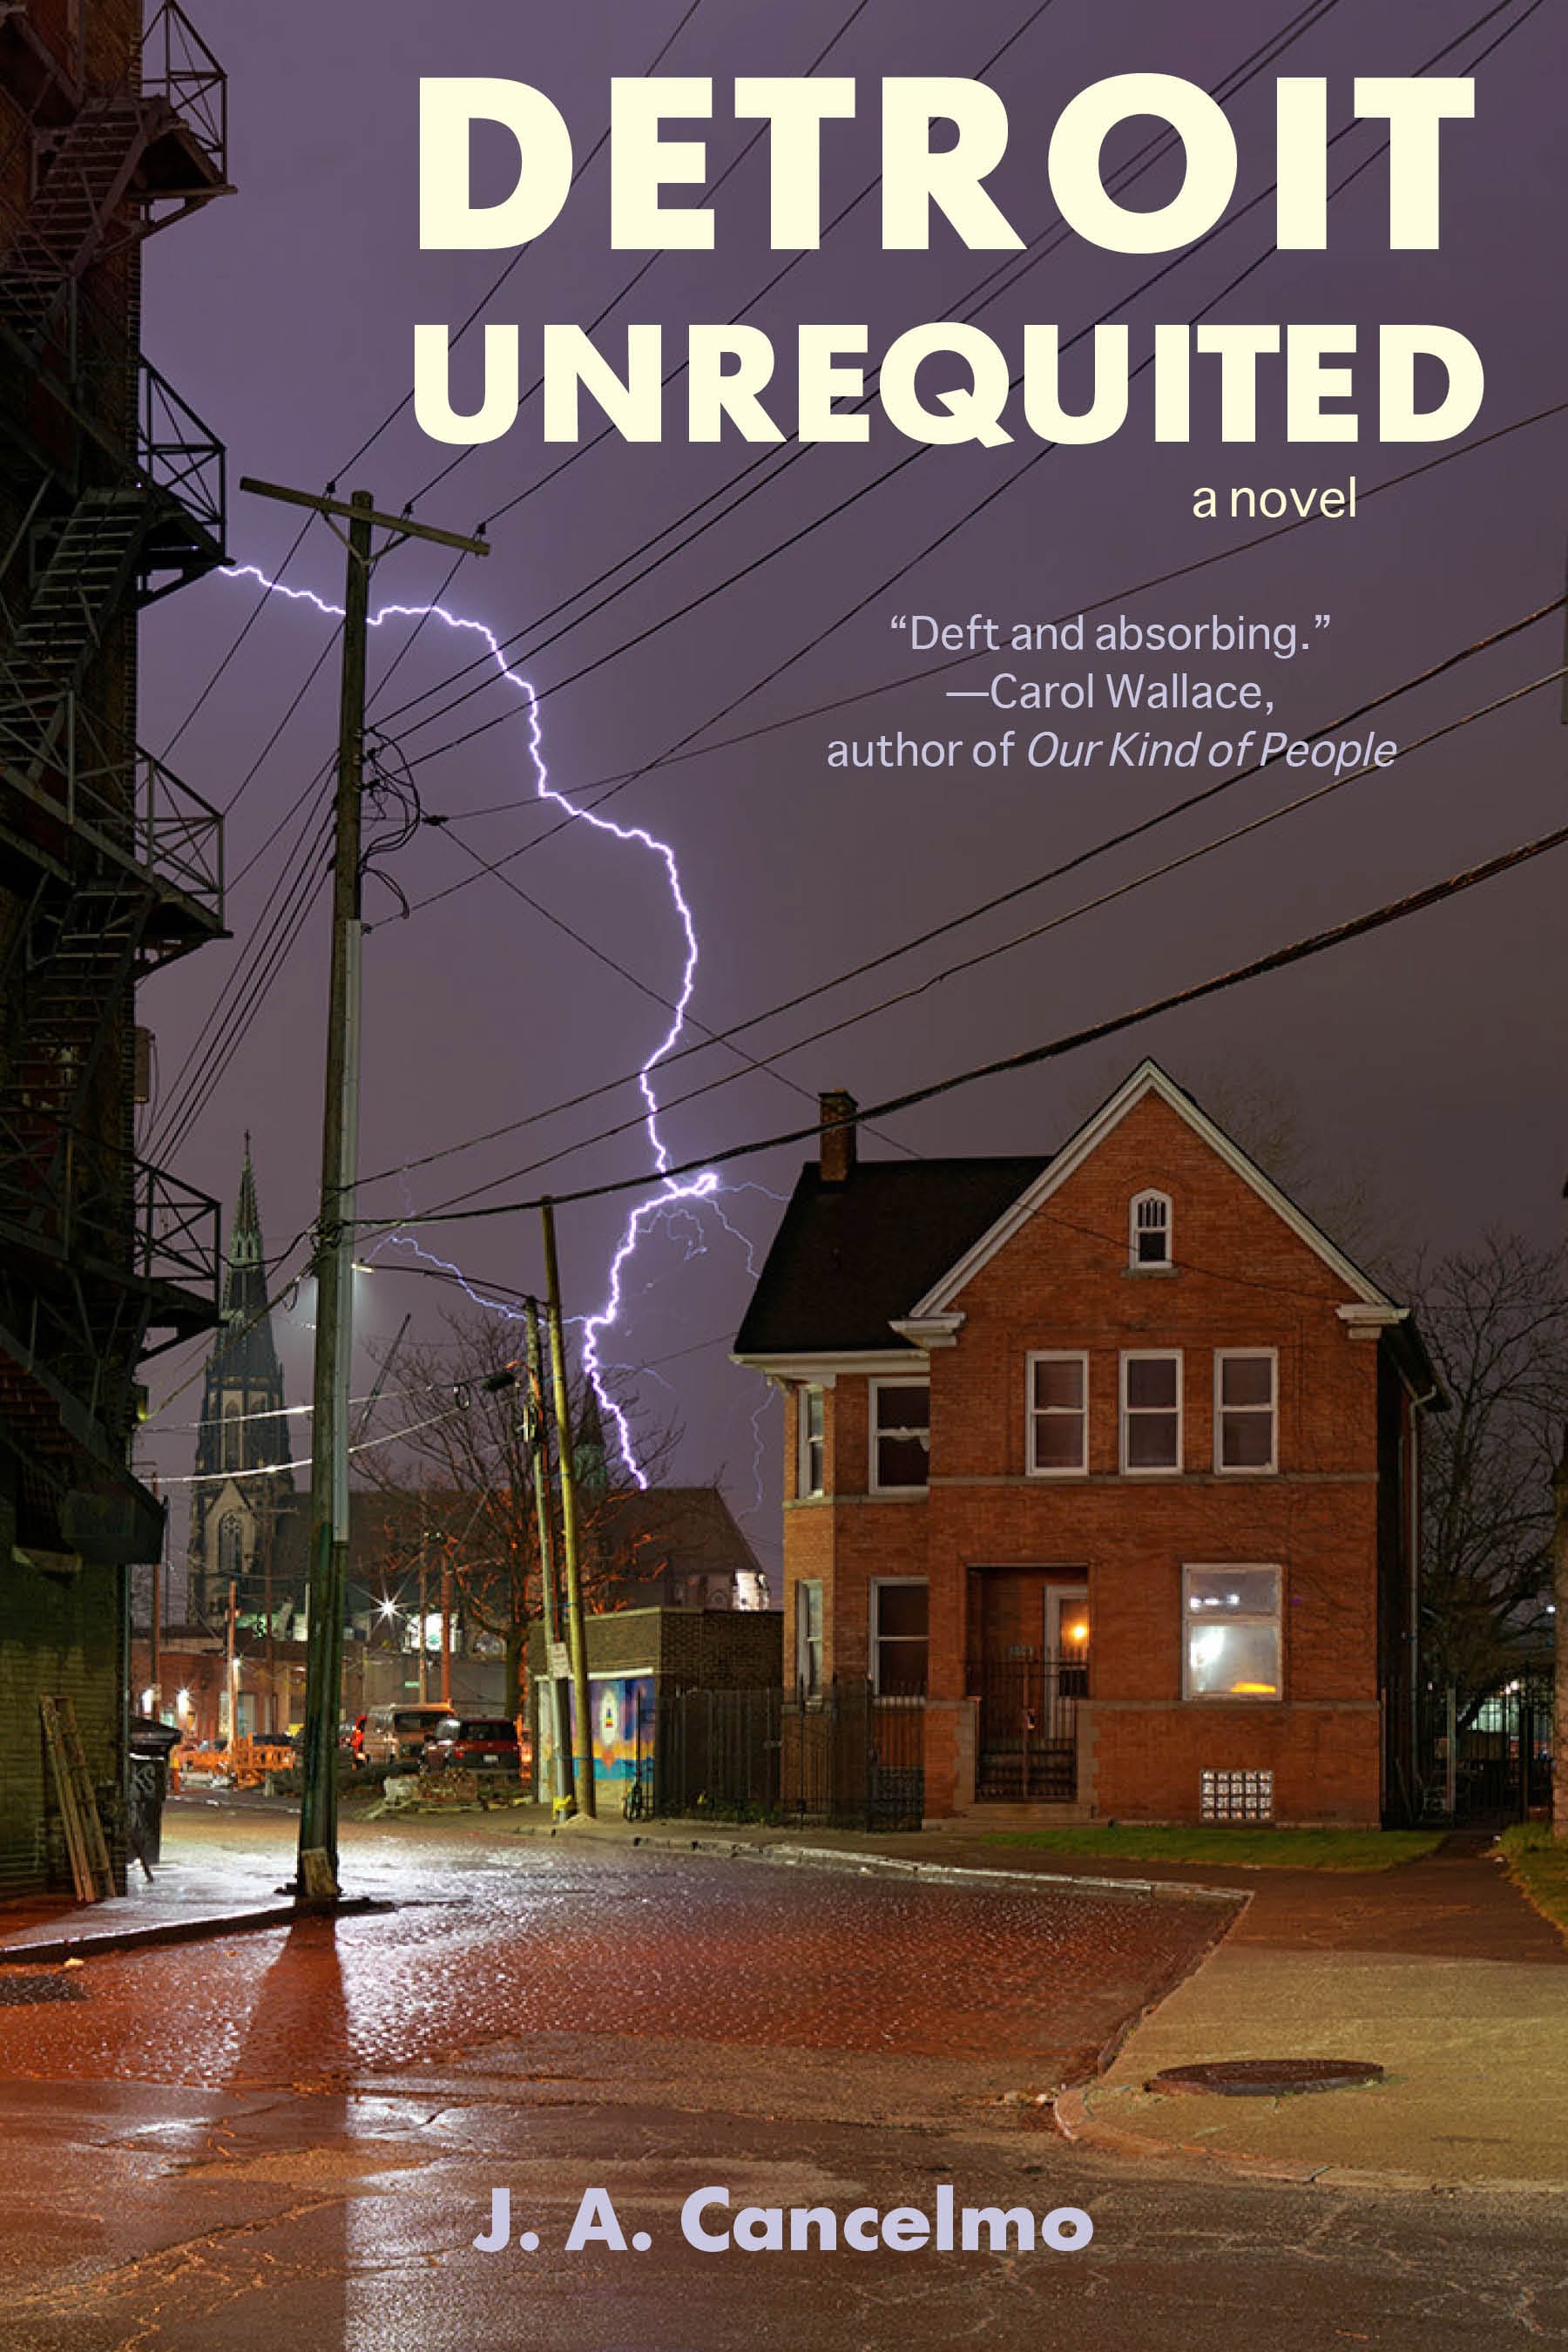 Detroit Unrequited: Excerpts and Context